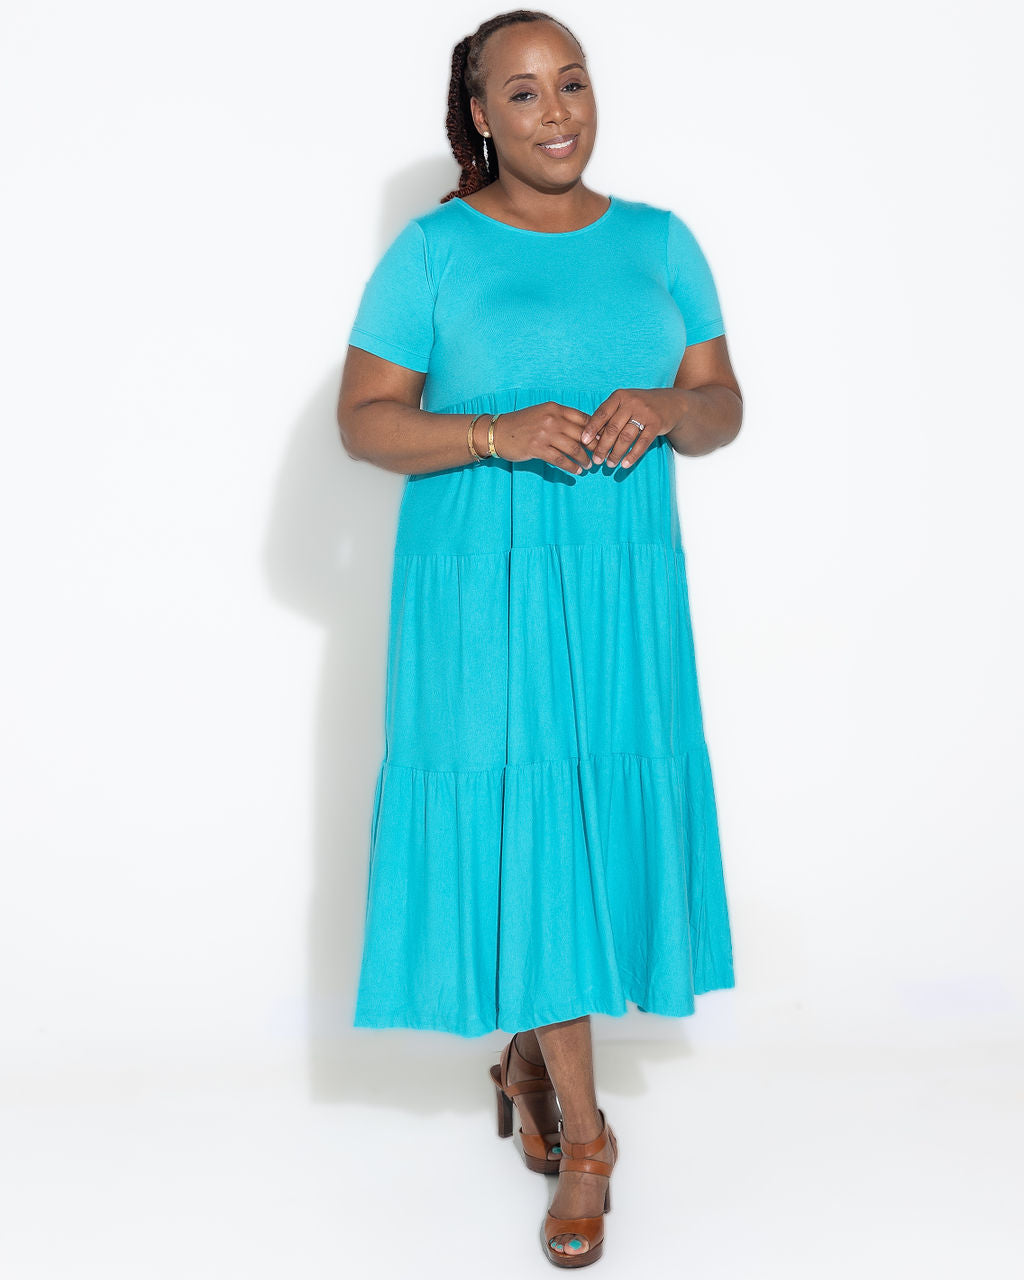 Fashions by RoPuddles turquoise blue midi dress